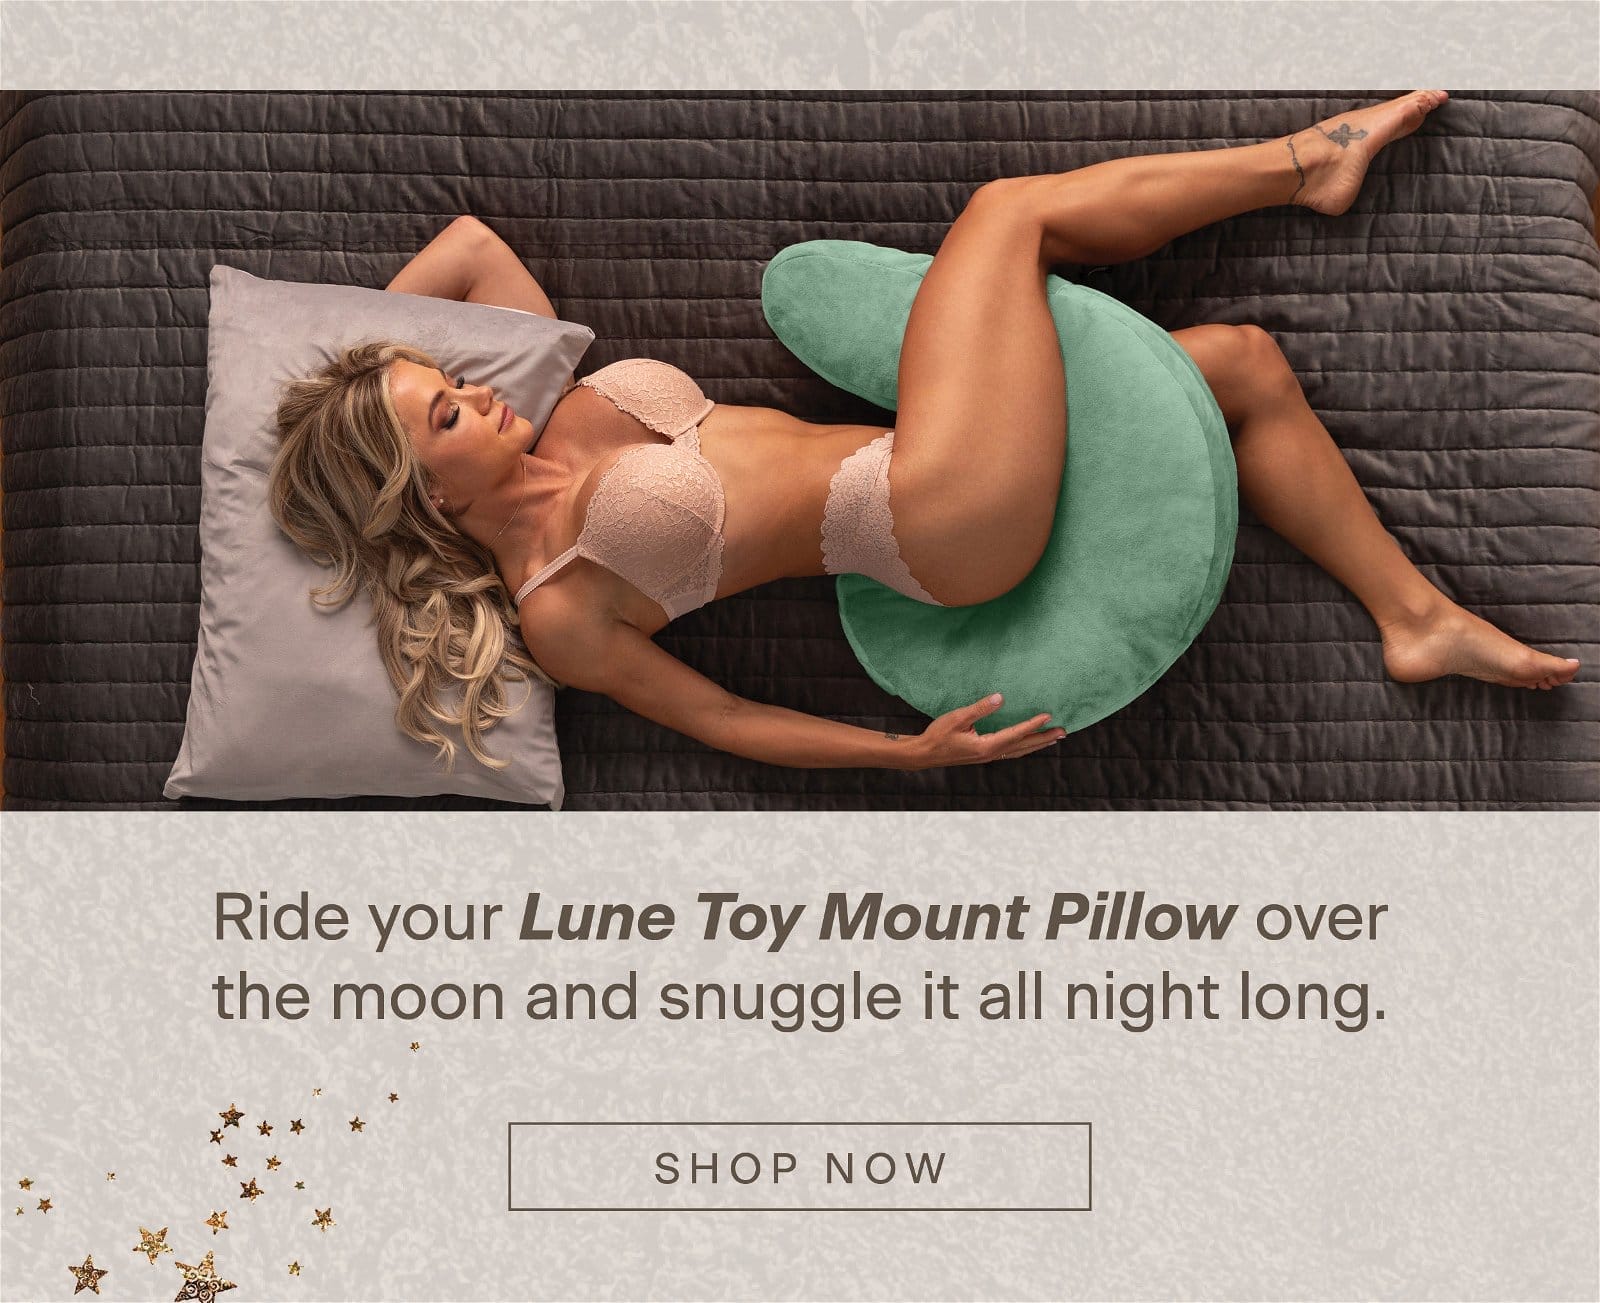 Lune – Ride your Lune Toy Mount Pillow over the moon and snuggle it all night long.